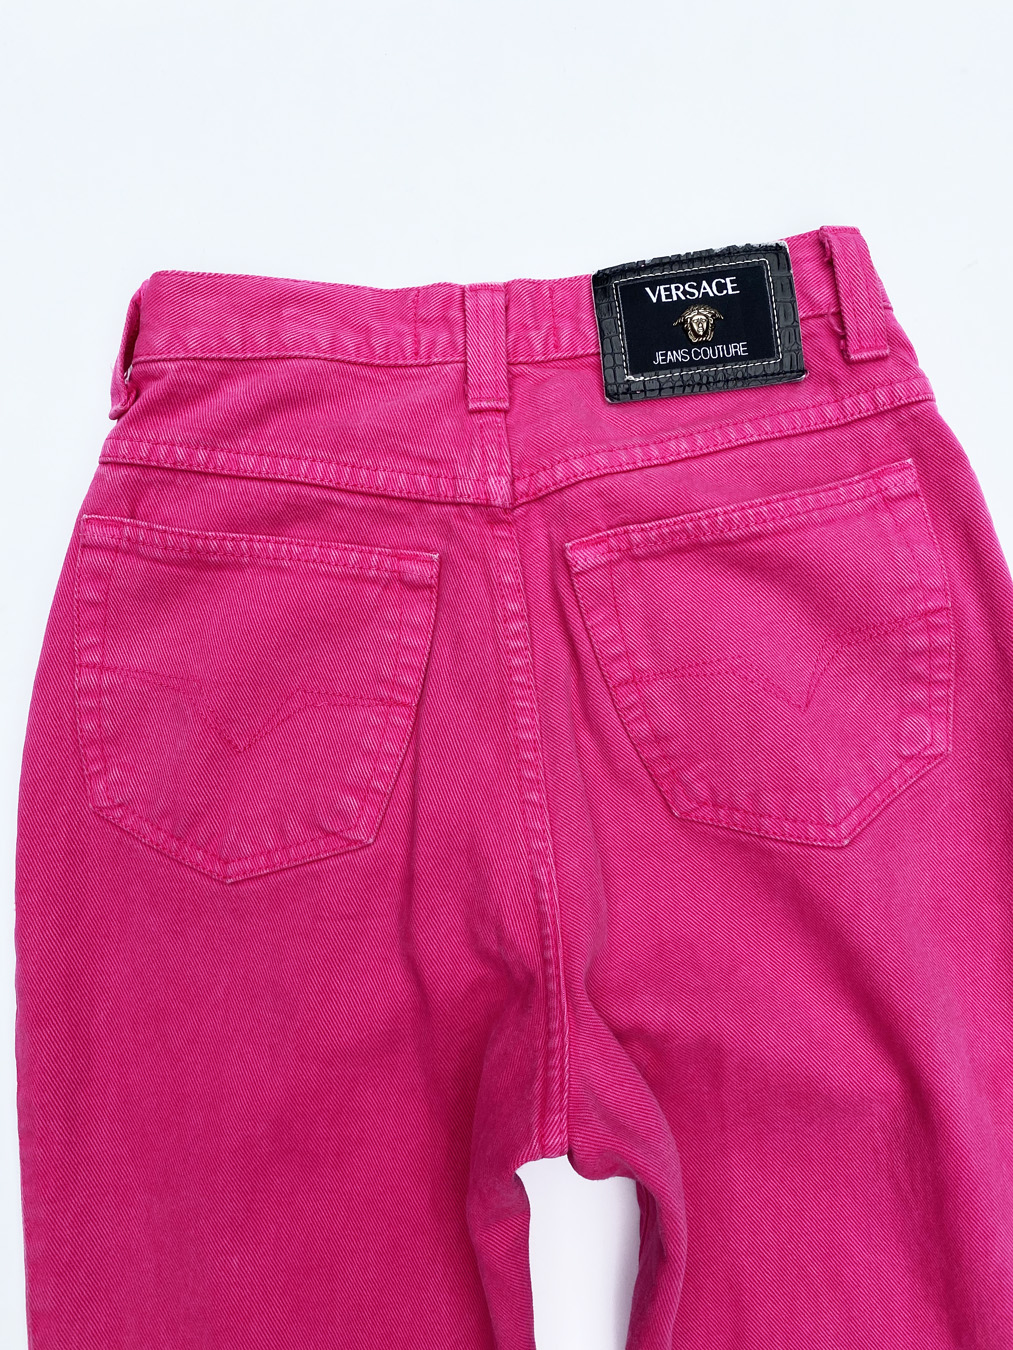 Versace Jeans Couture Hot Pink High-Waisted Jeans - Size IT 28 42 (US Size  2-4) - Vintage 1990s Rare - thethingsyouwear